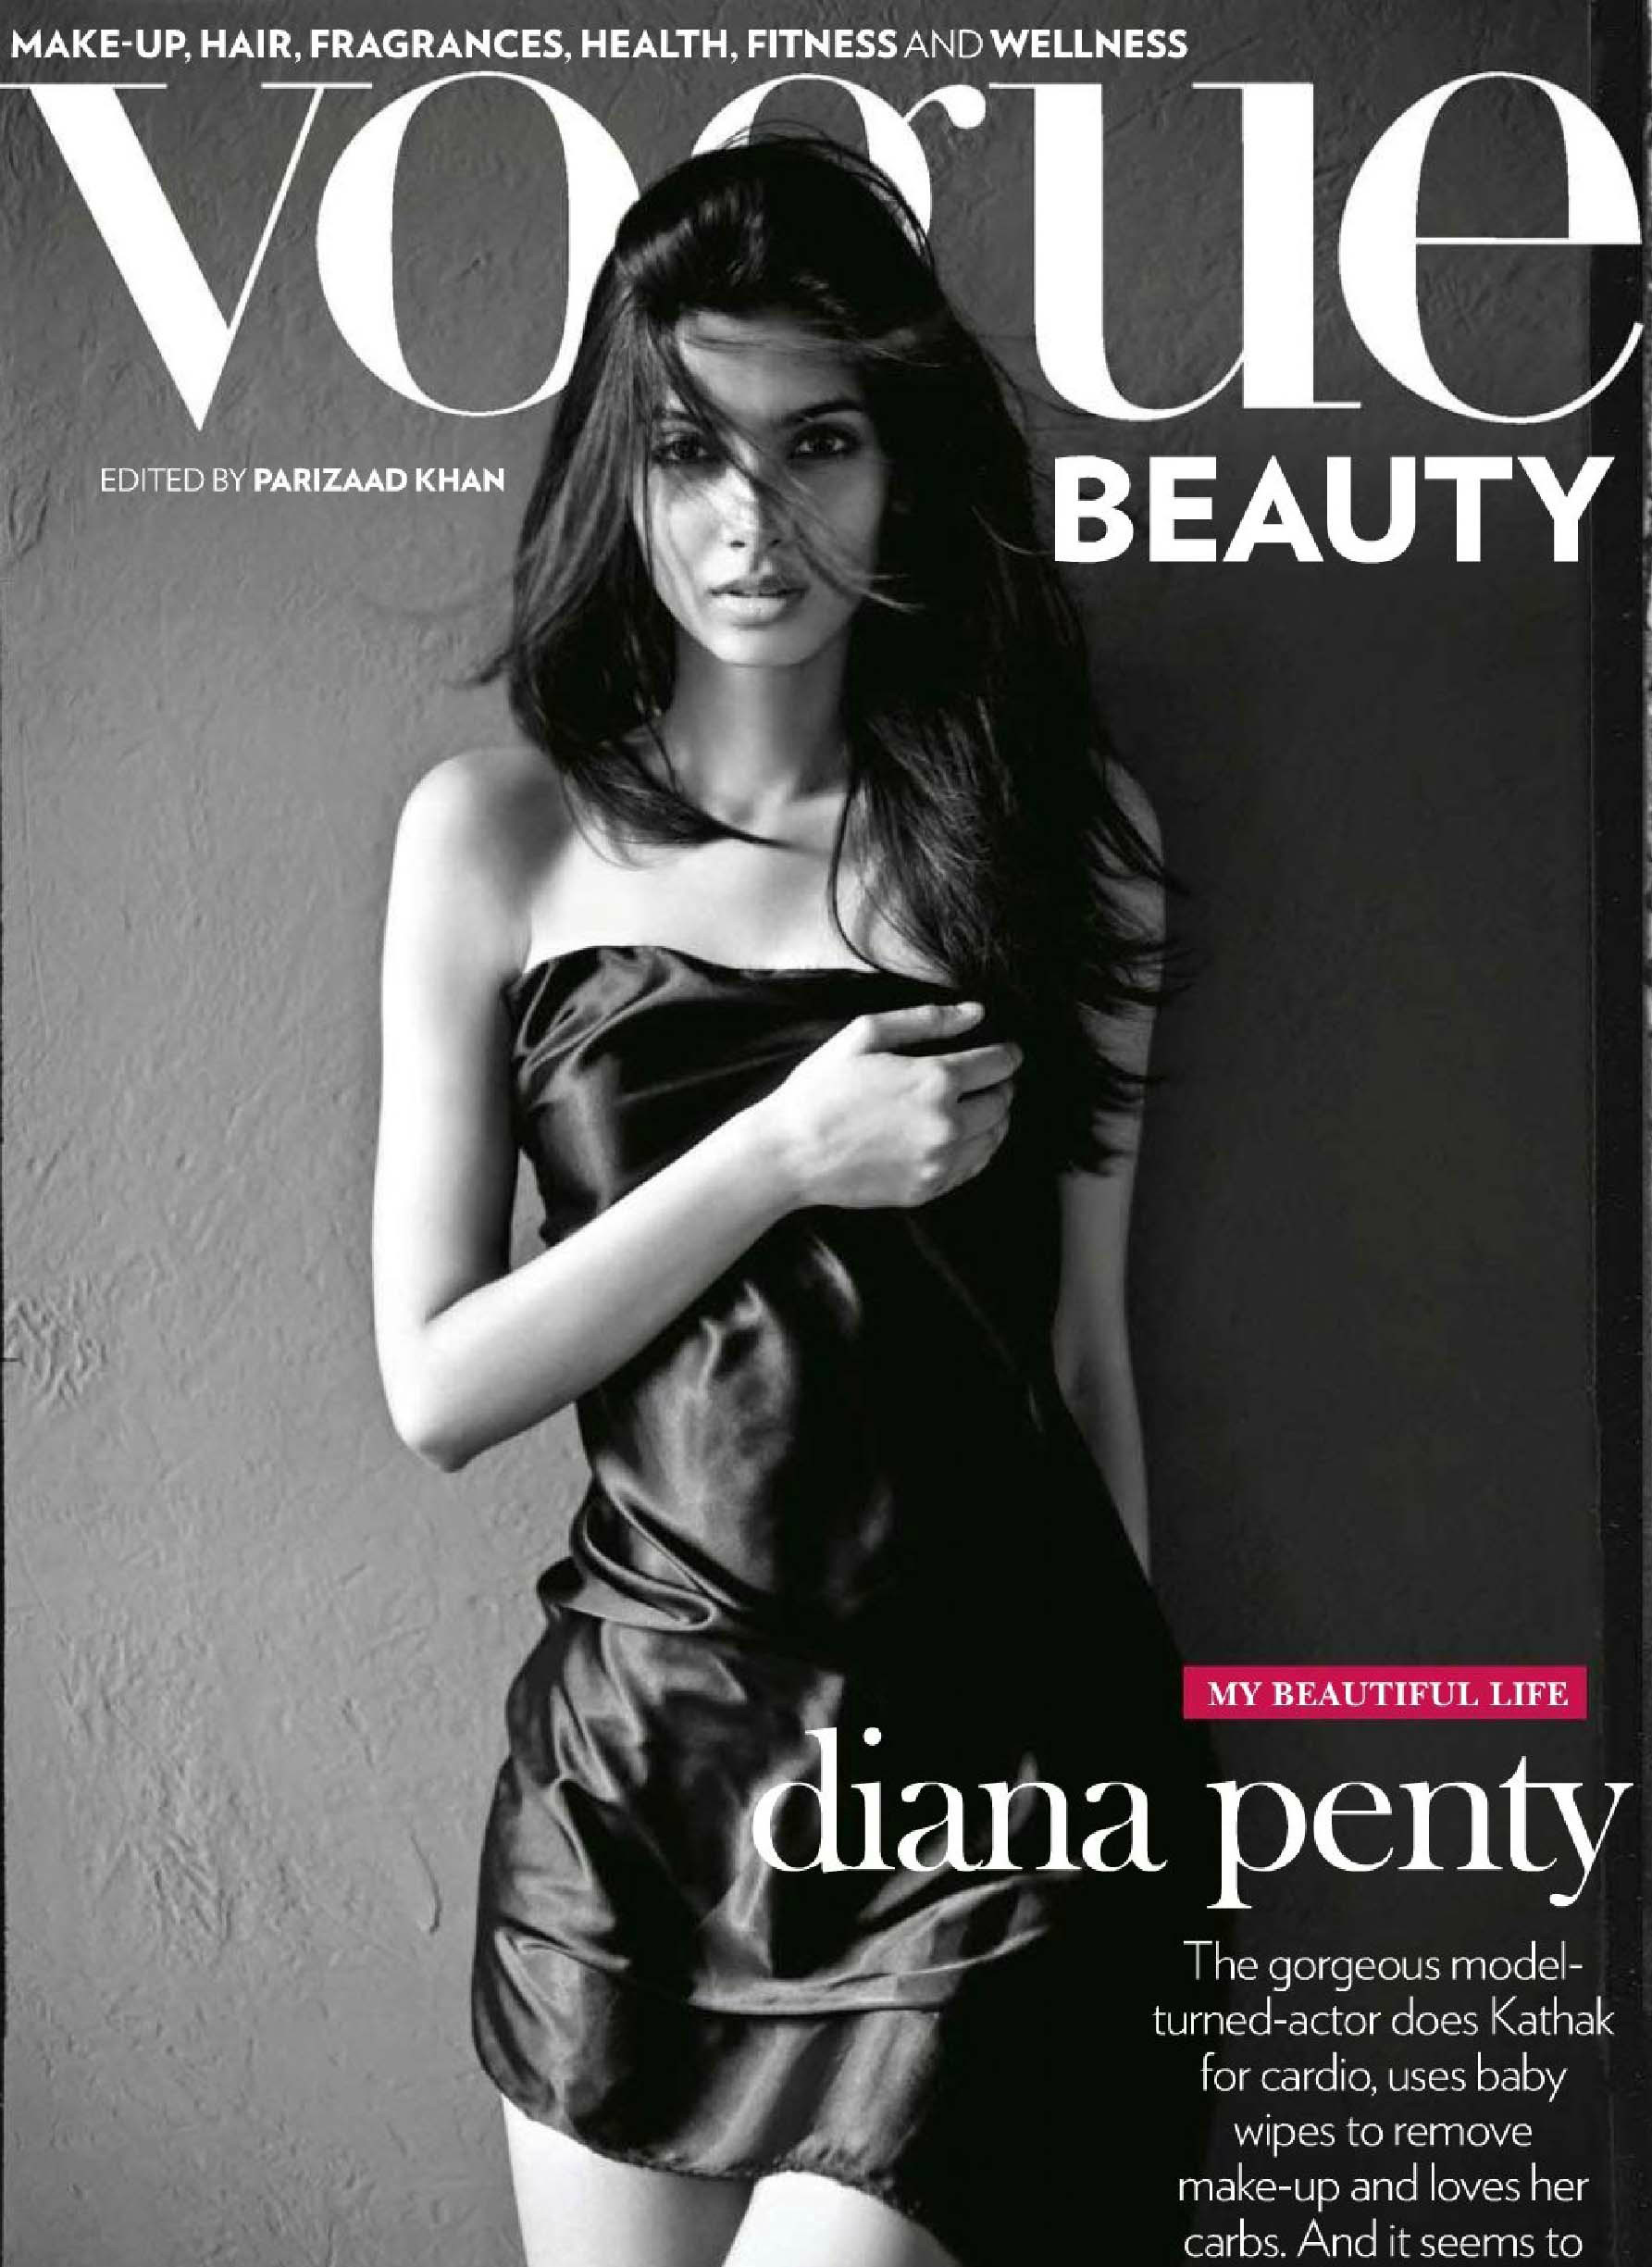 Diana Penty In Vogue Wallpaper Hd Indian Celebrities 4k Wallpapers Images Photos And Background Wallpapers Den